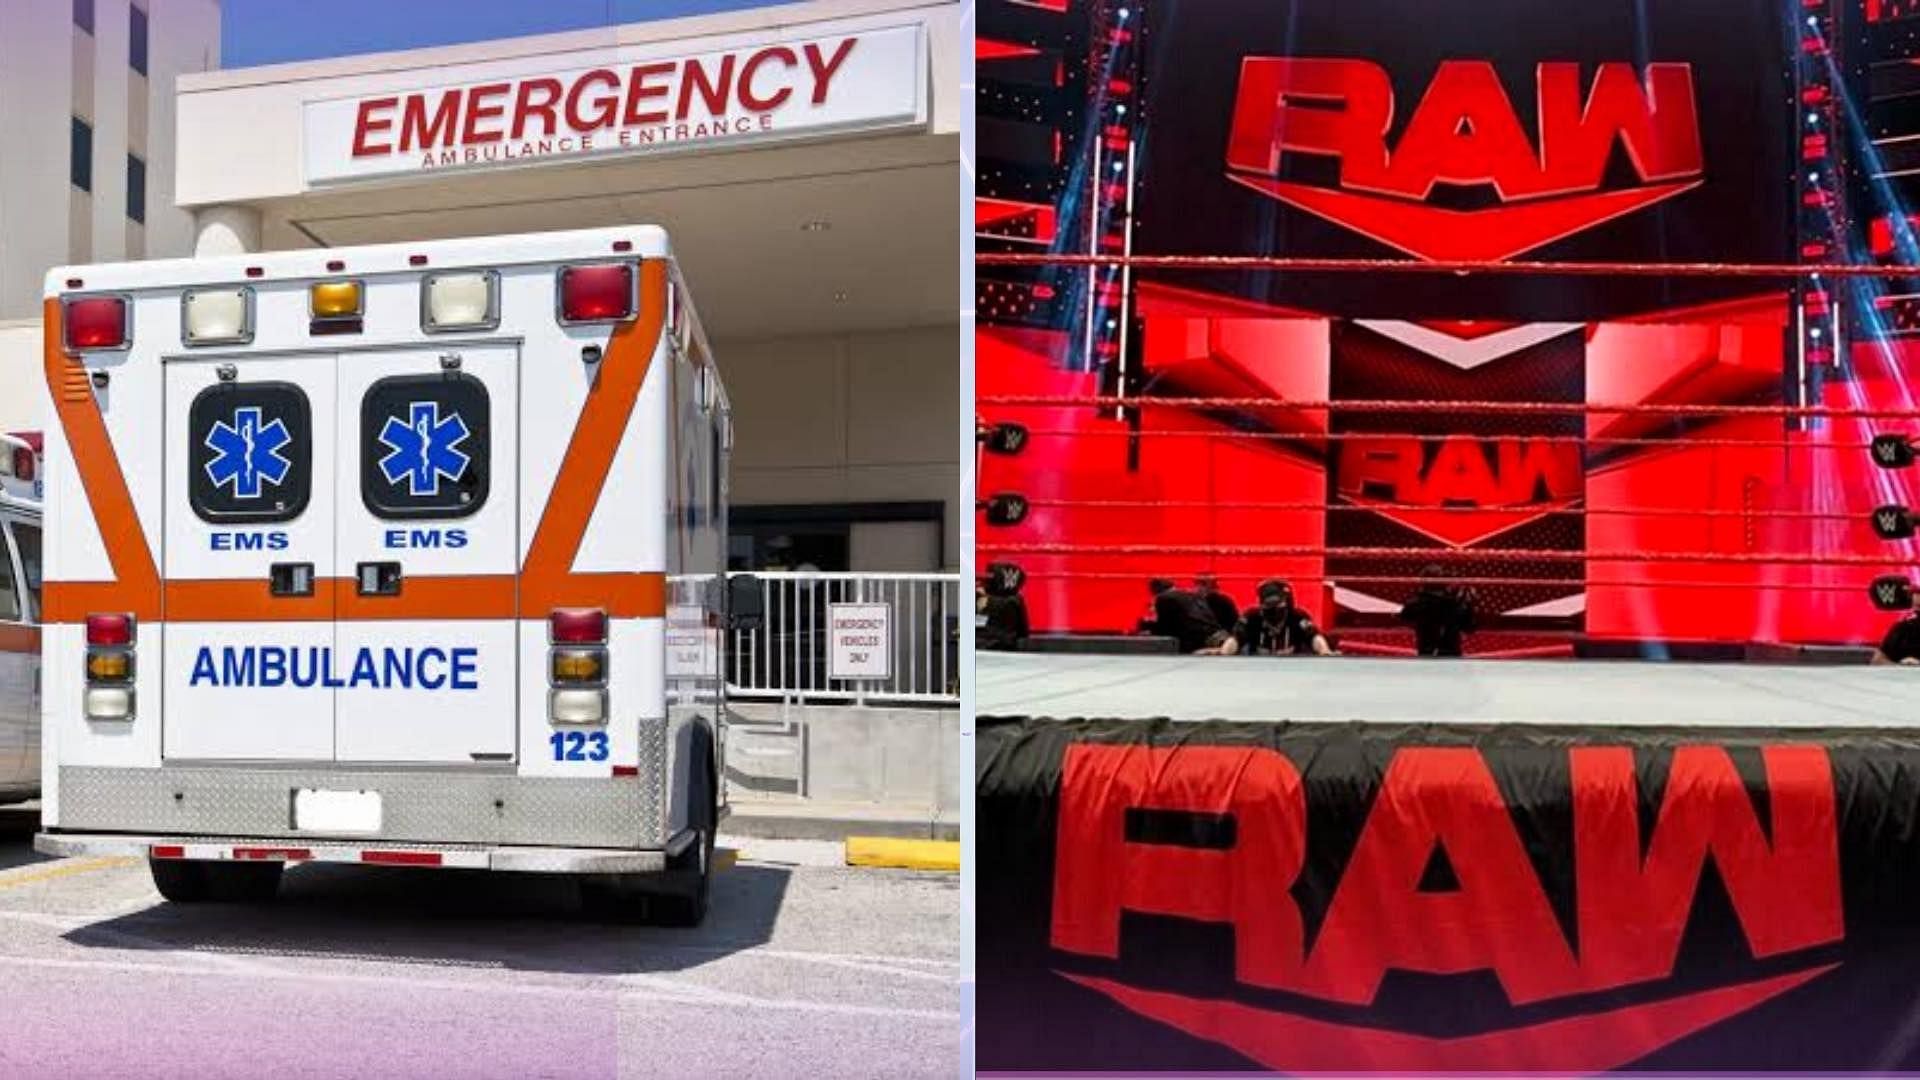 RAW had to go through some changes due to an injury